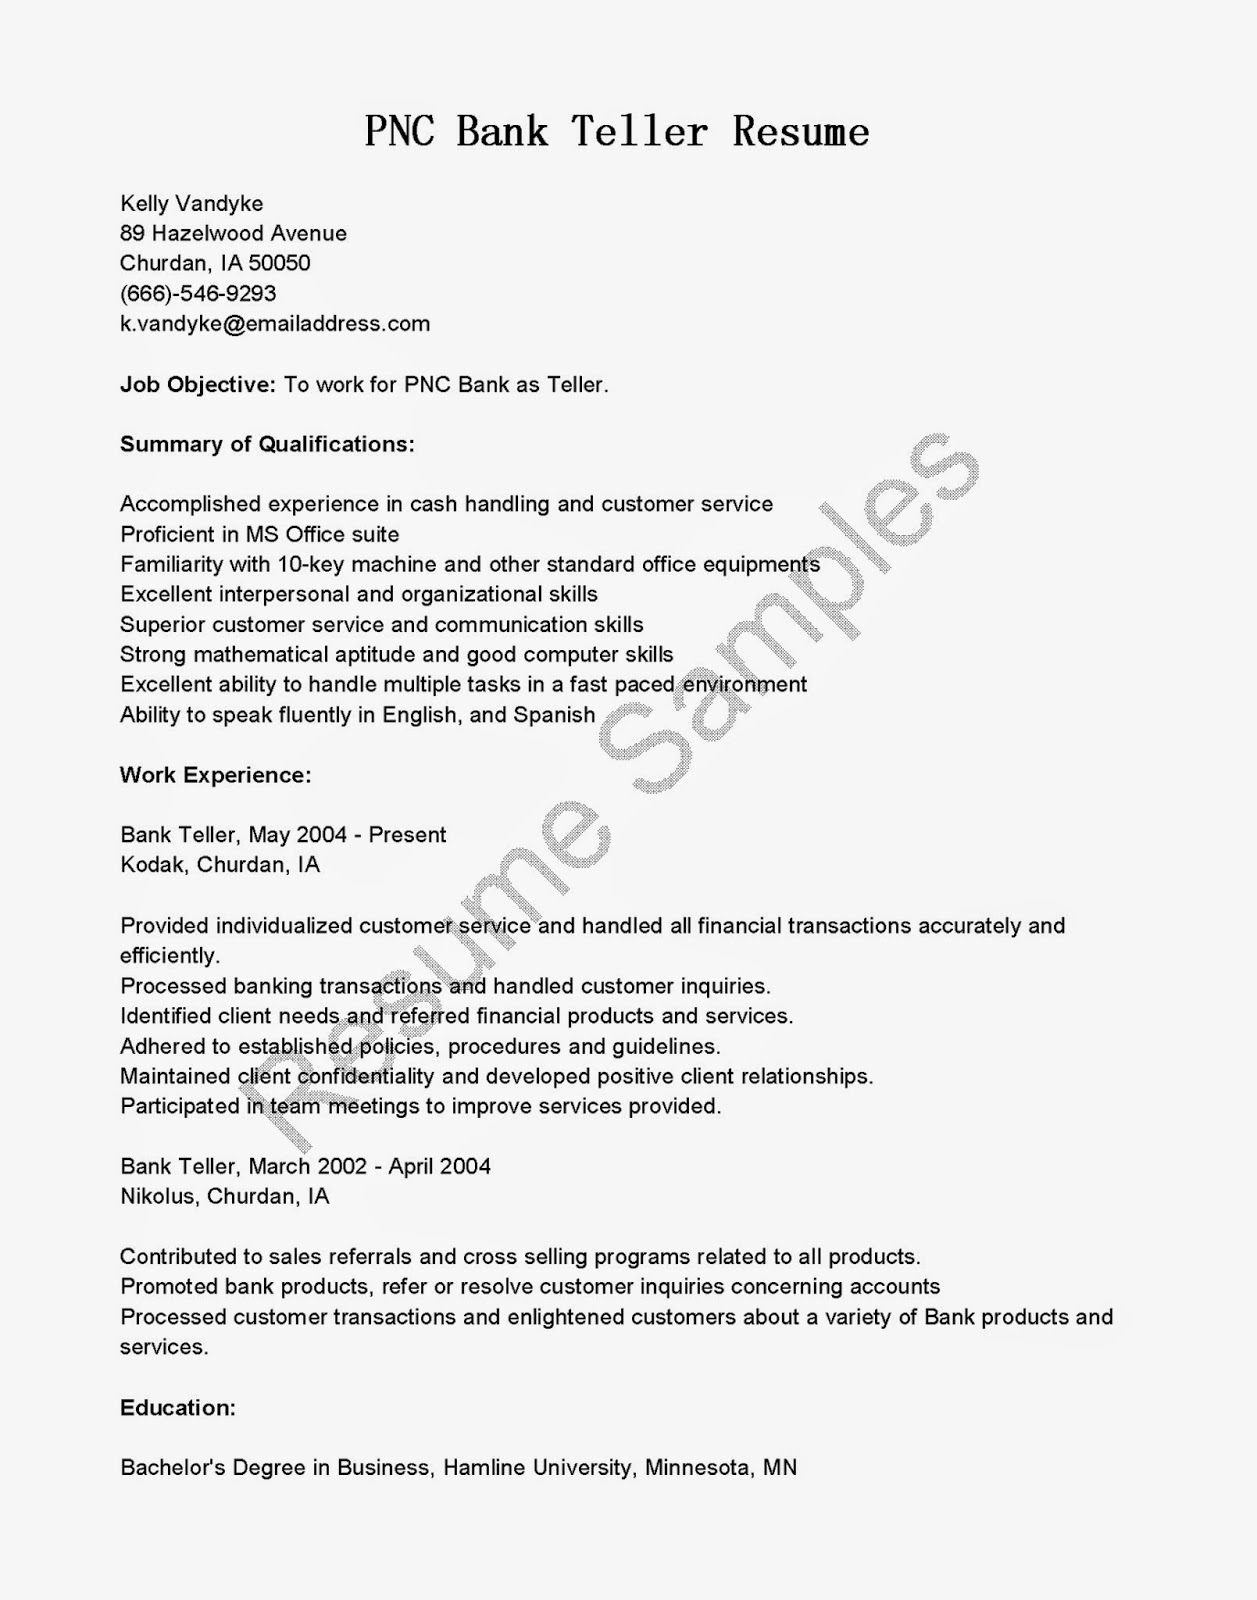 Sample cover letter for bank teller with experience